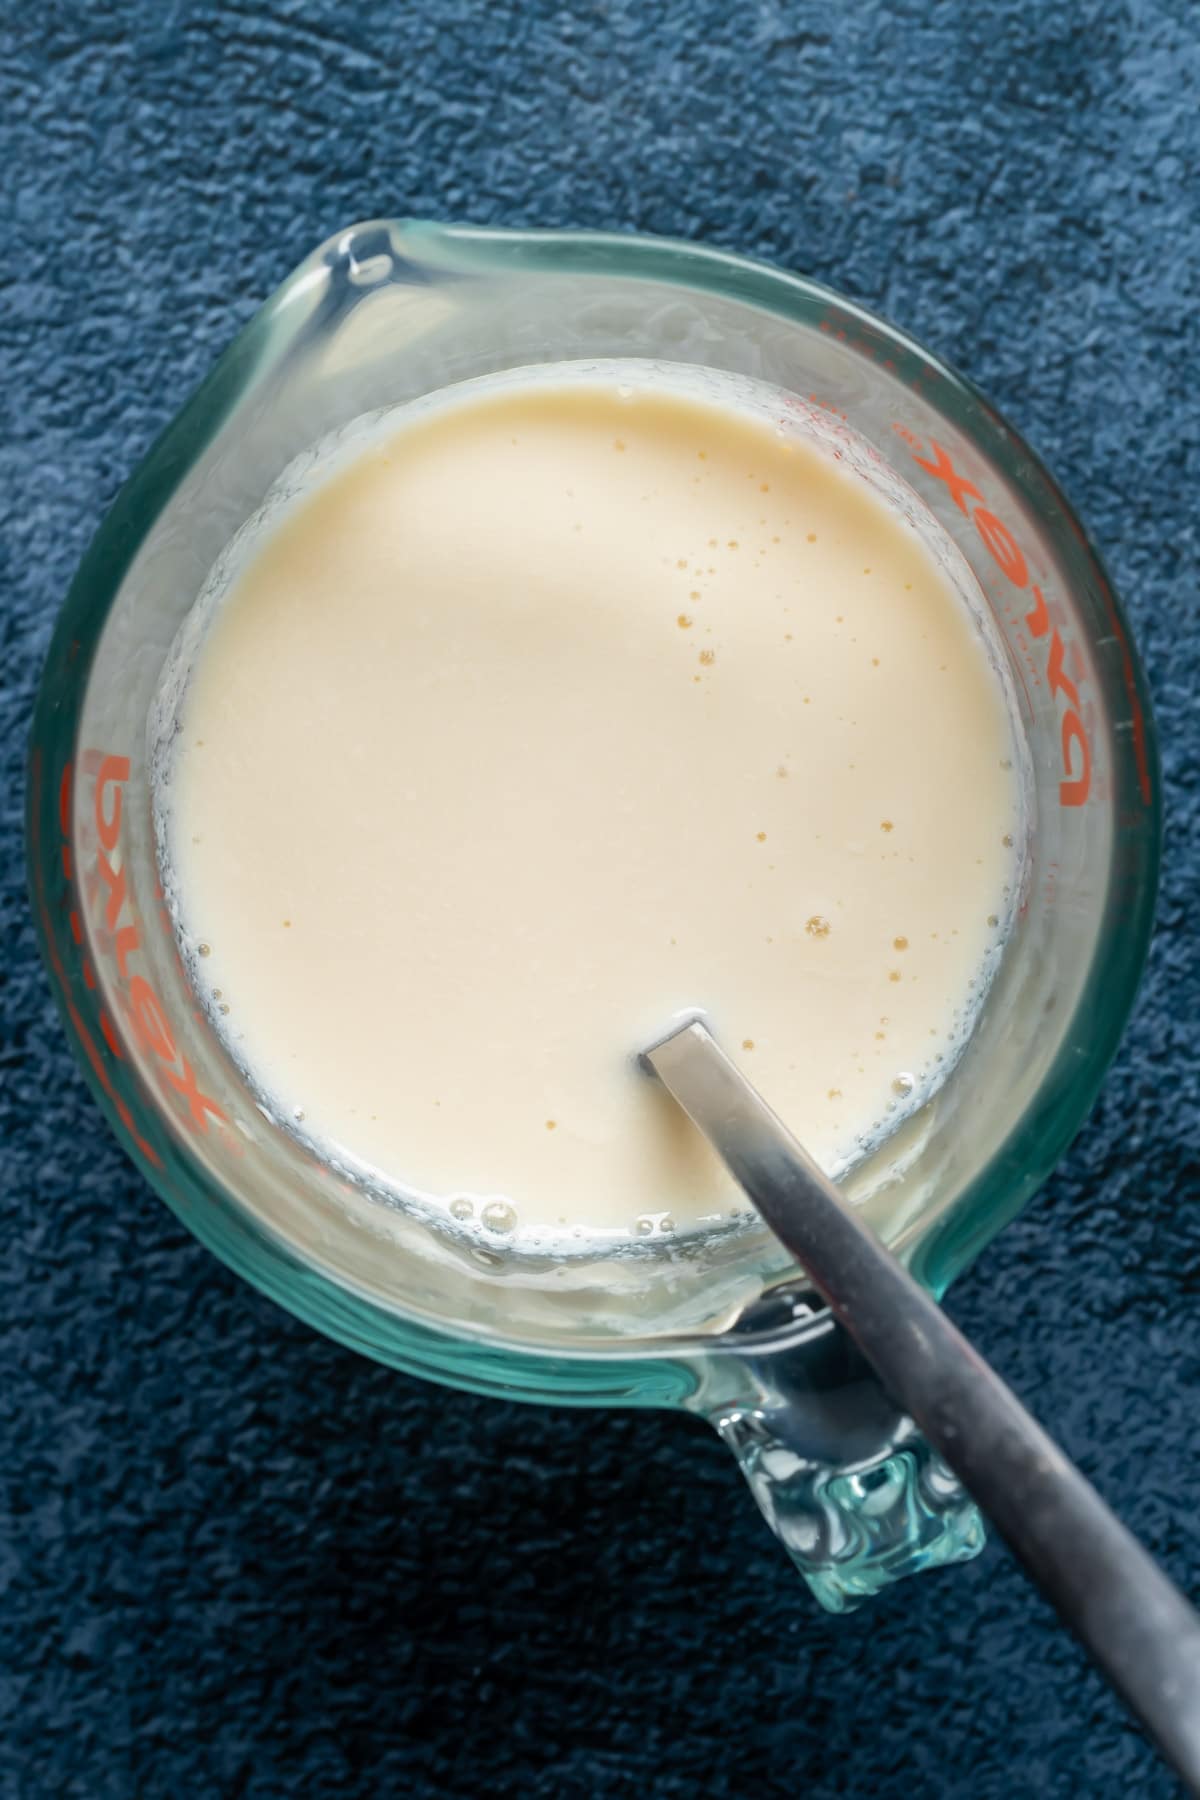 Vegan buttermilk in a glass jug with a spoon.